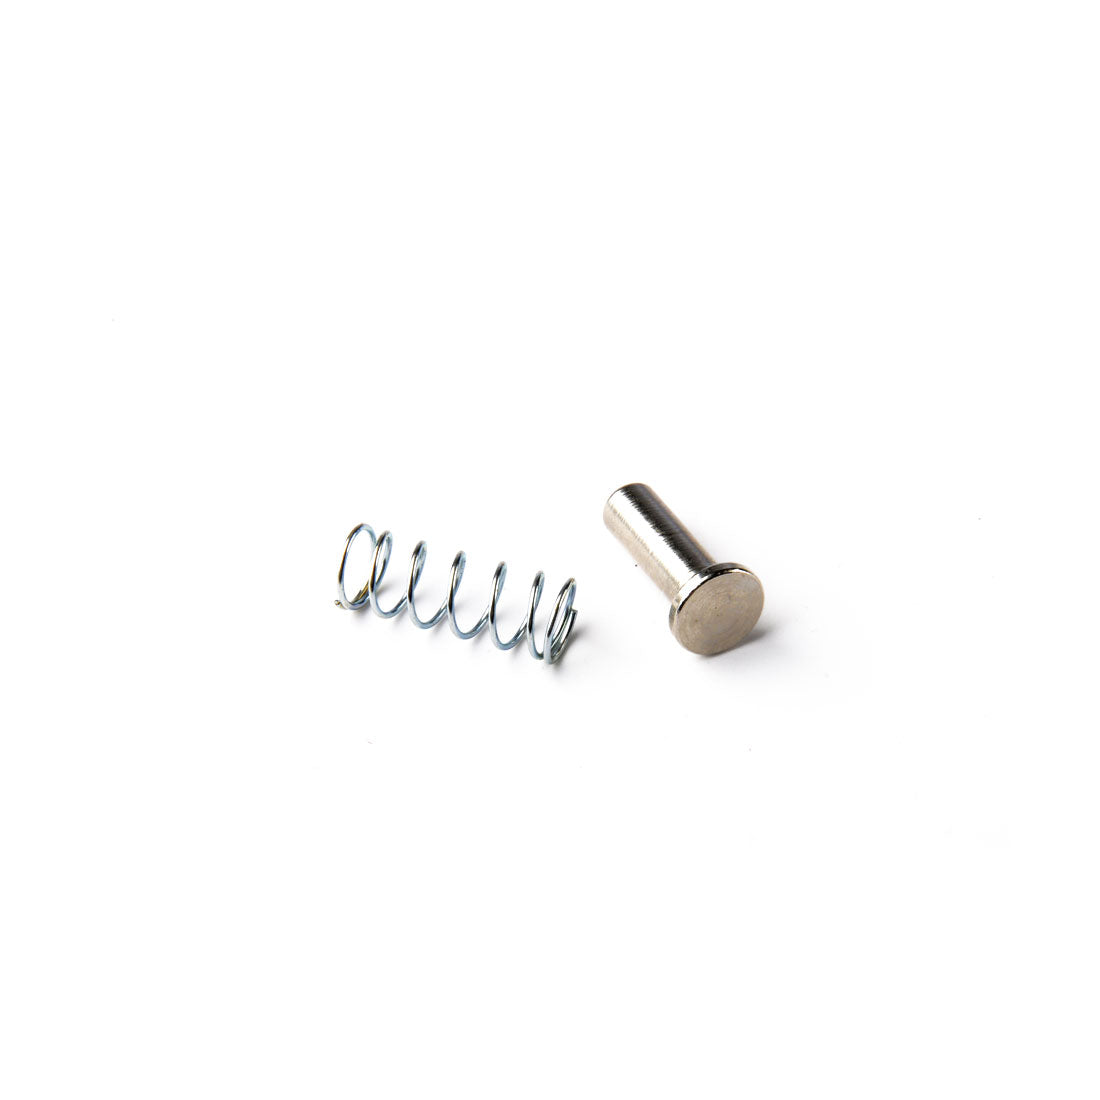 Micro Locking System Spring & Bolt - 1042 Scooter Hardware and Parts